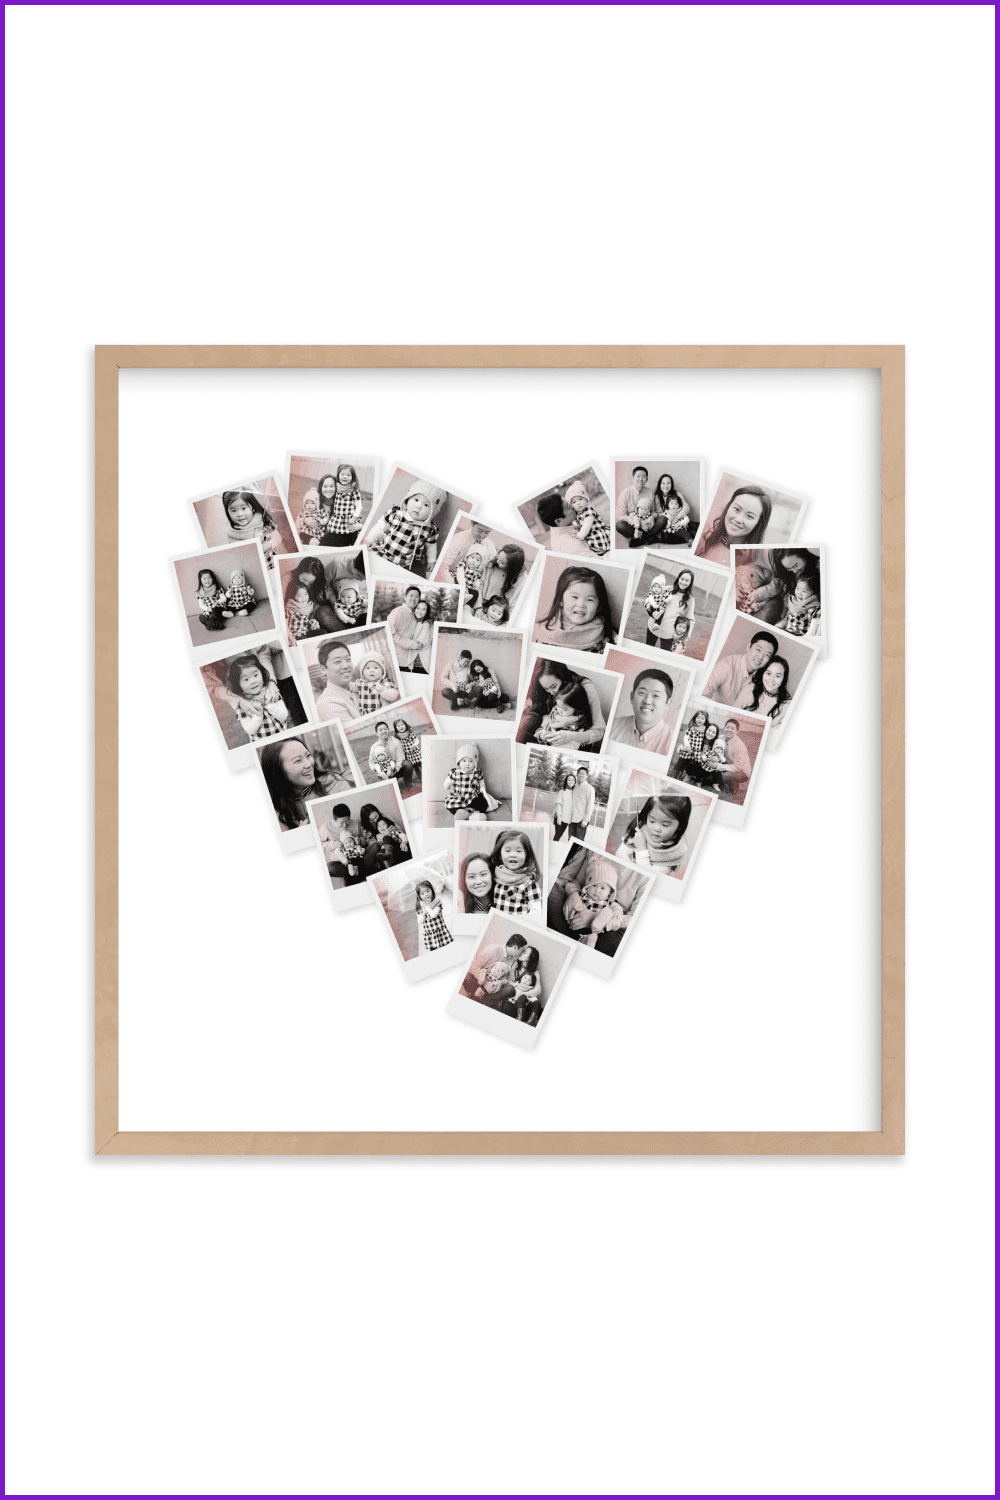 Heart-shaped collection of photos in the frame.